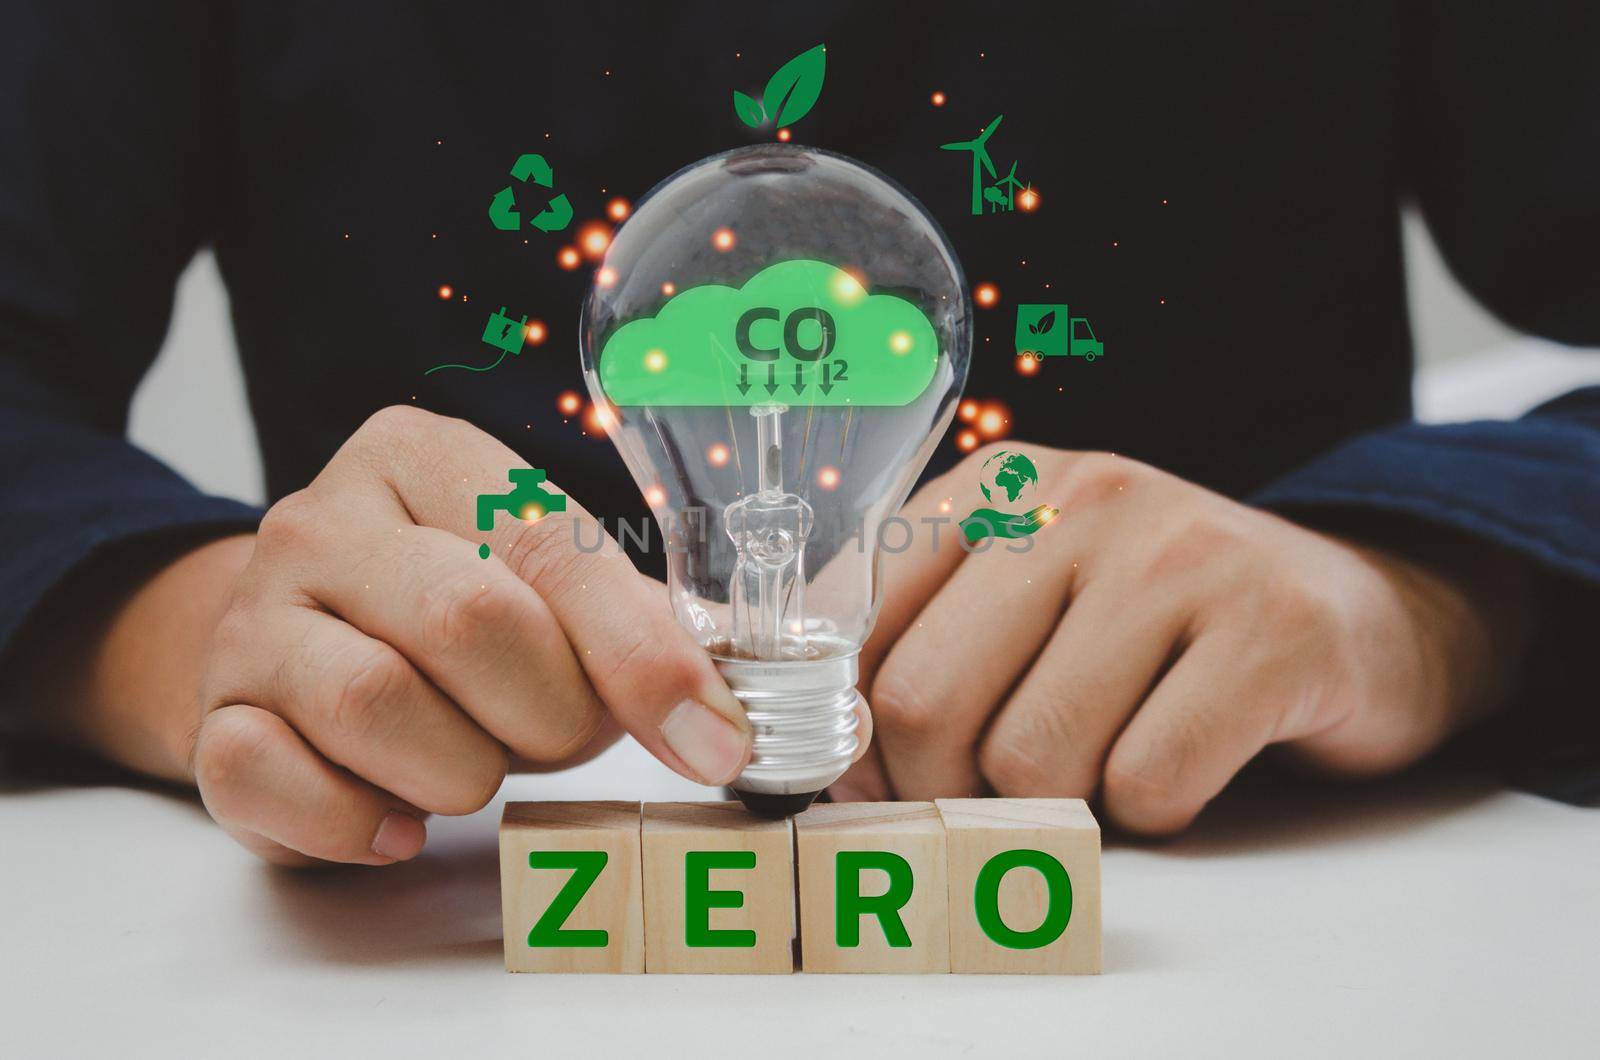 Net zero greenhouse gas emissions to as close to zero as possible, with any remaining emissions reabsorbed into the environment.Business eco innovation carbon target concept.